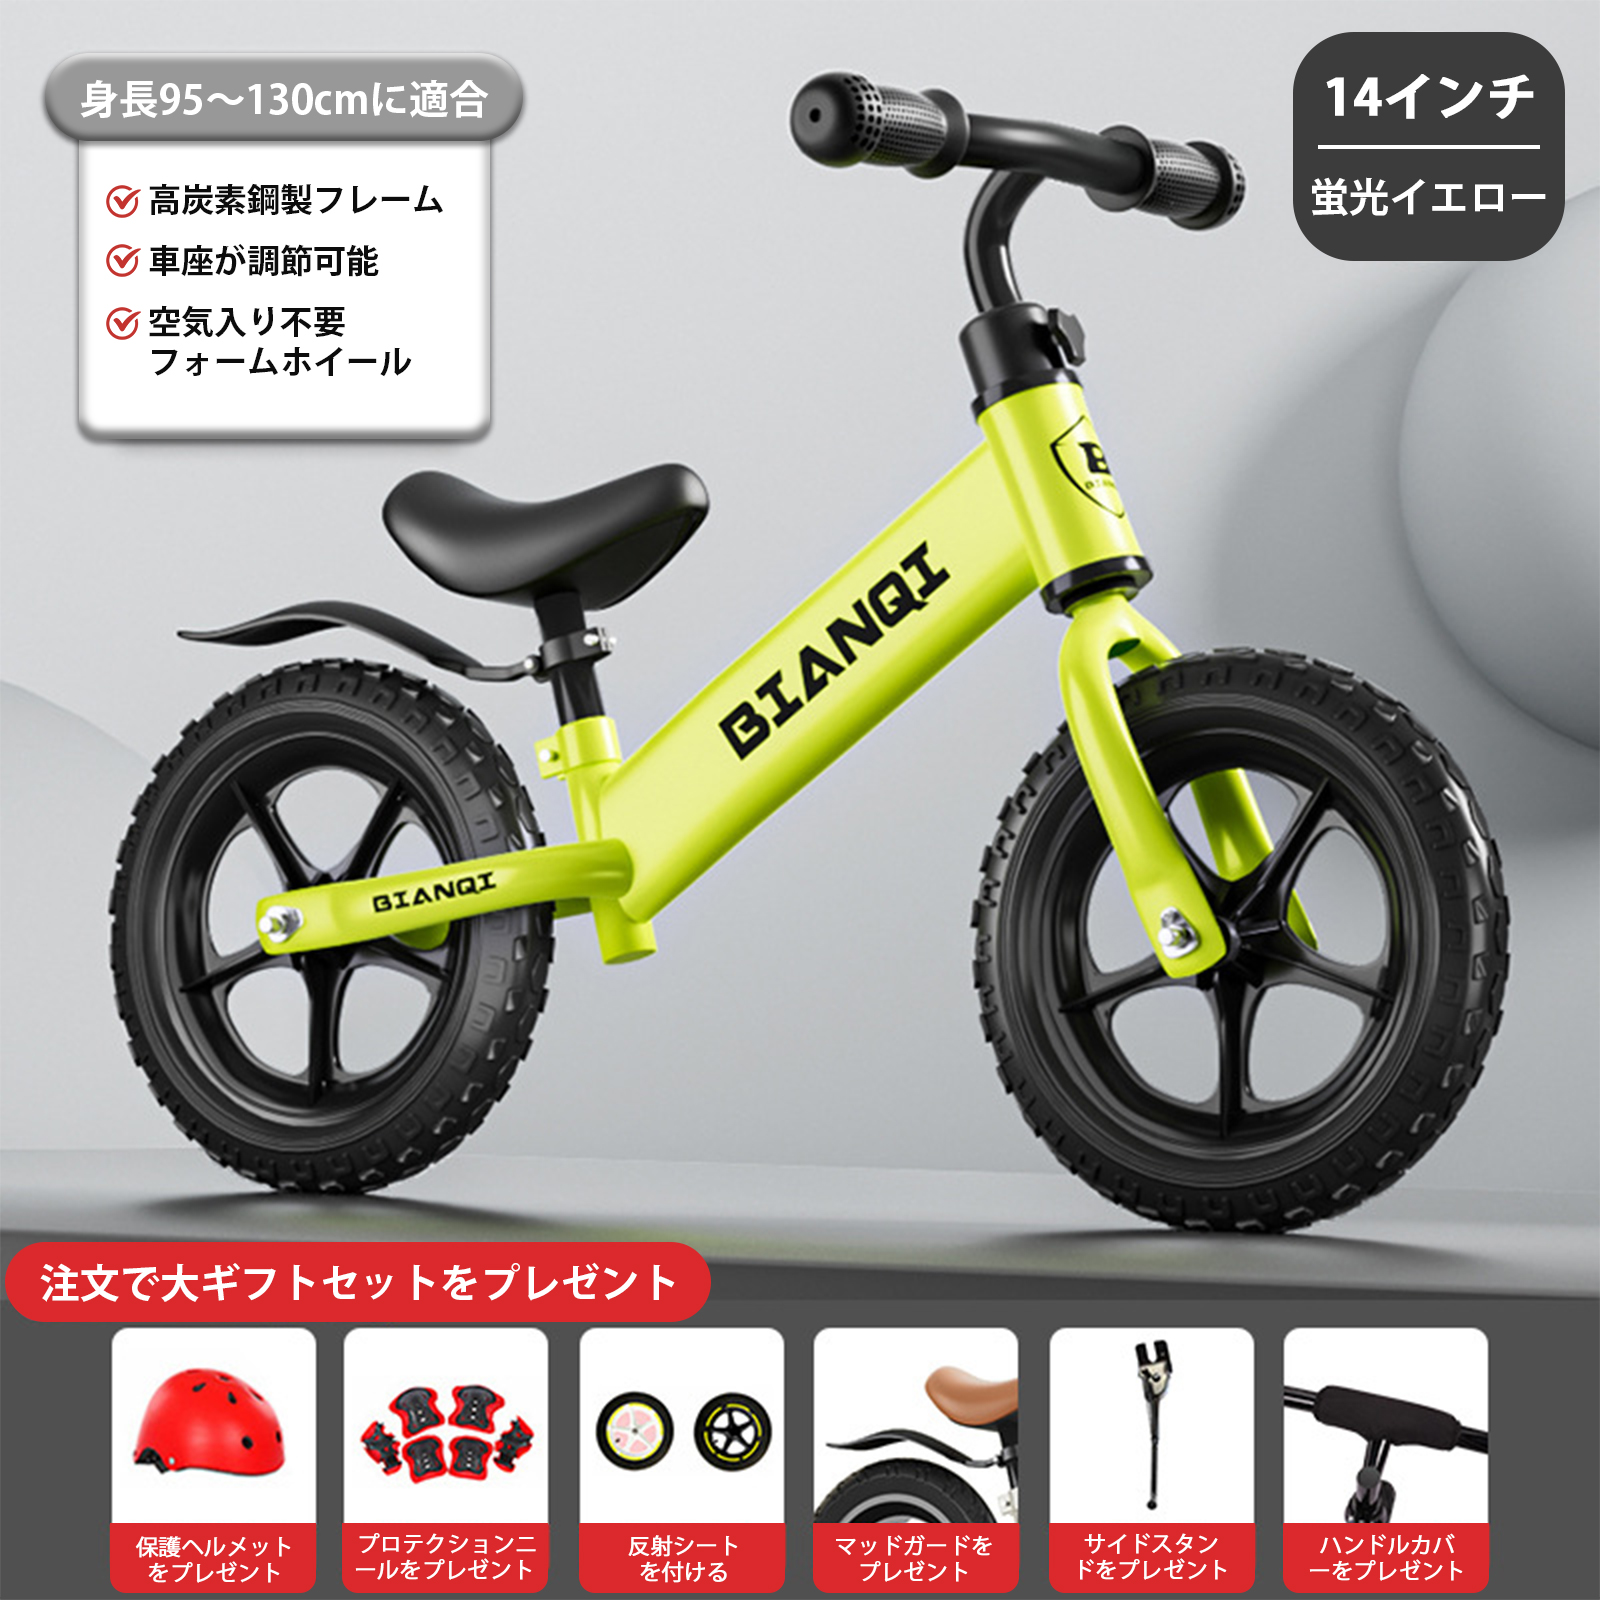 K14 fluorescent yellow integrated inflatable wheel